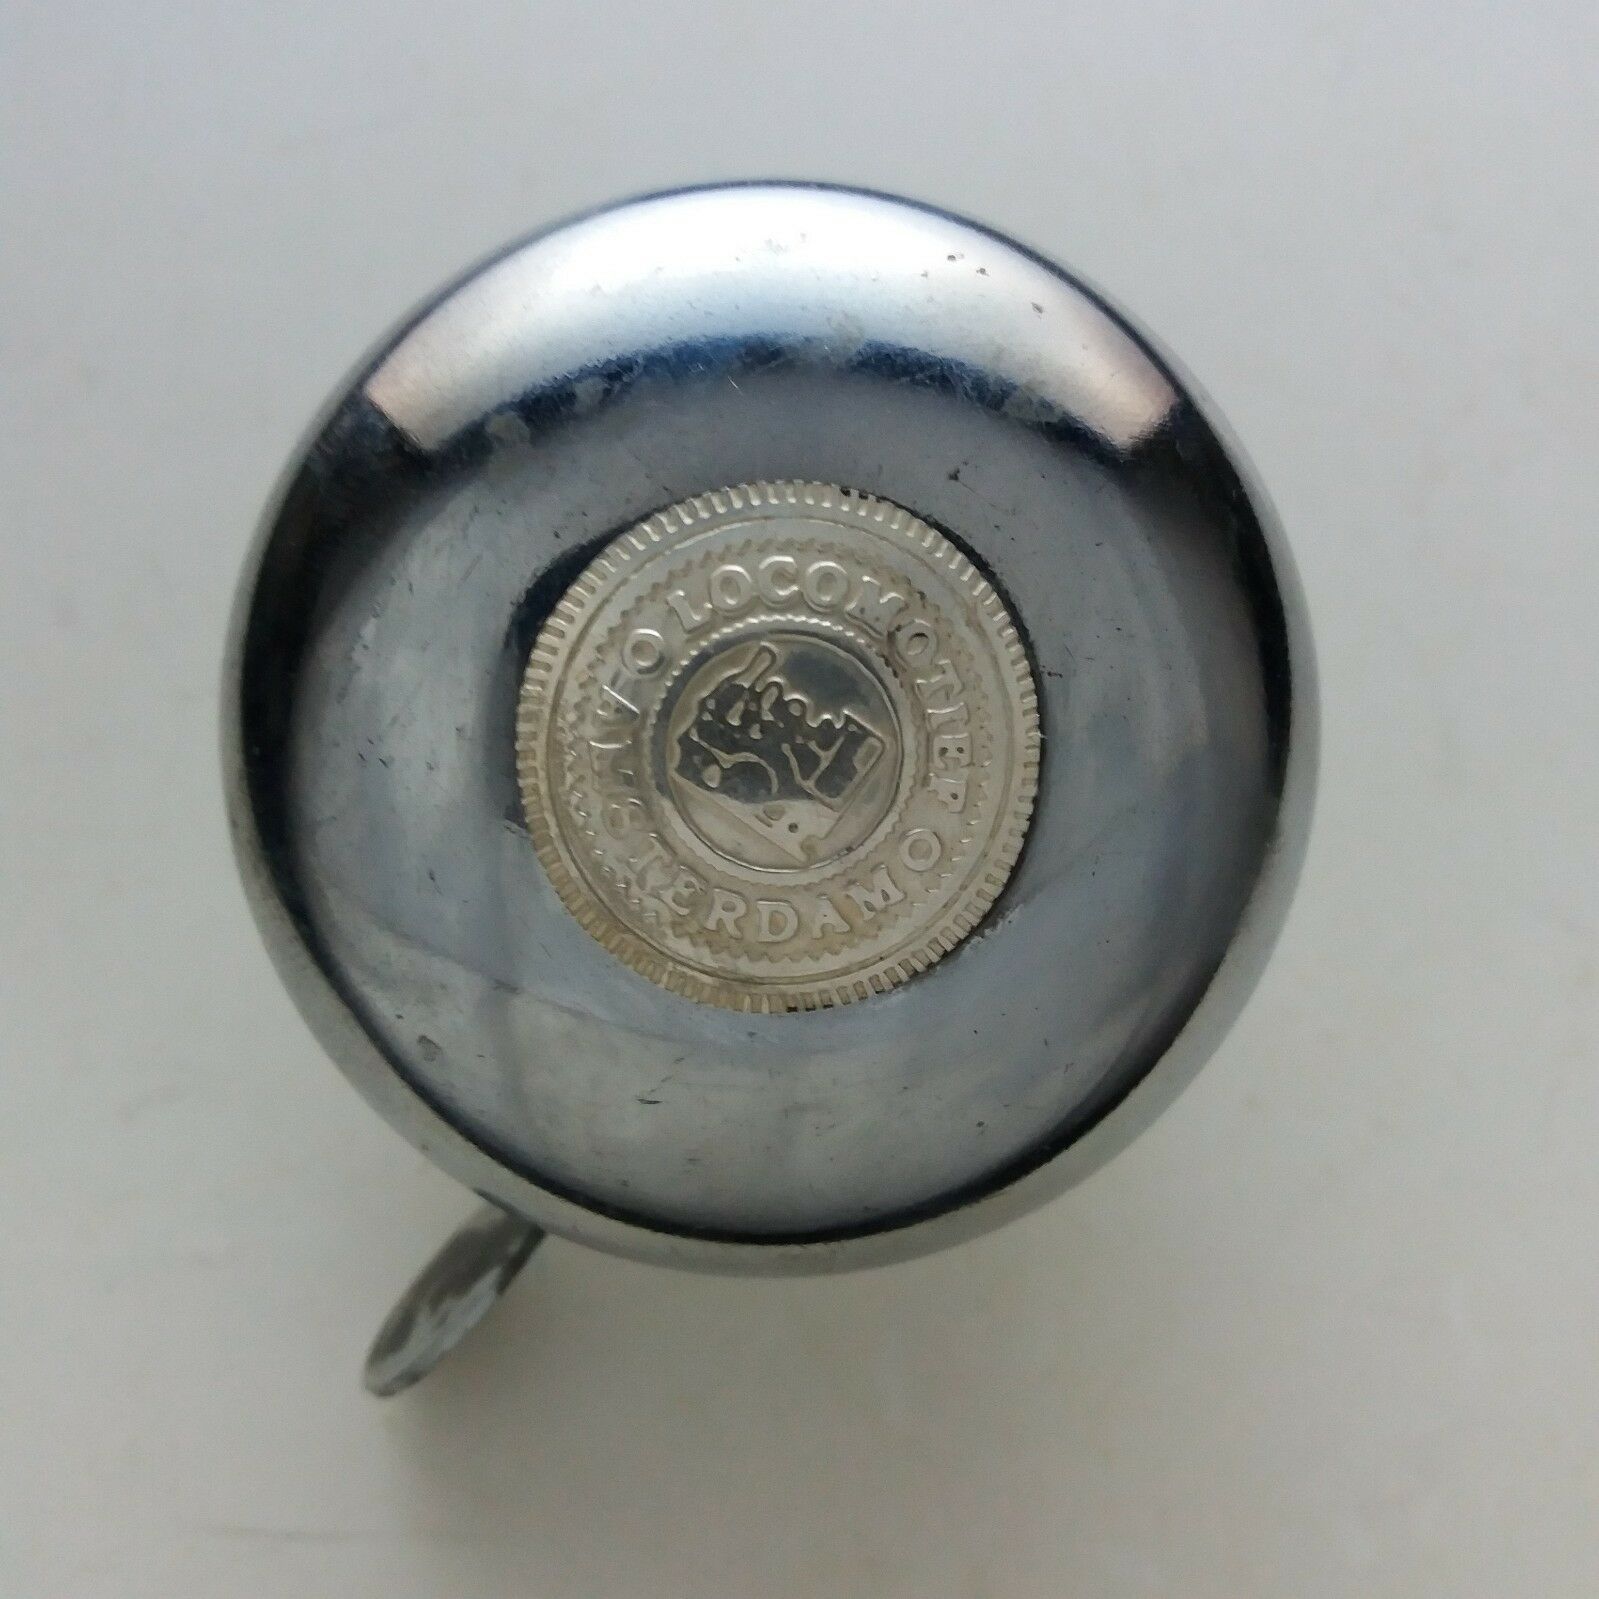 Primary image for Bicycle bell Locomotief chromed silver bring bring sound for vintage bicycle